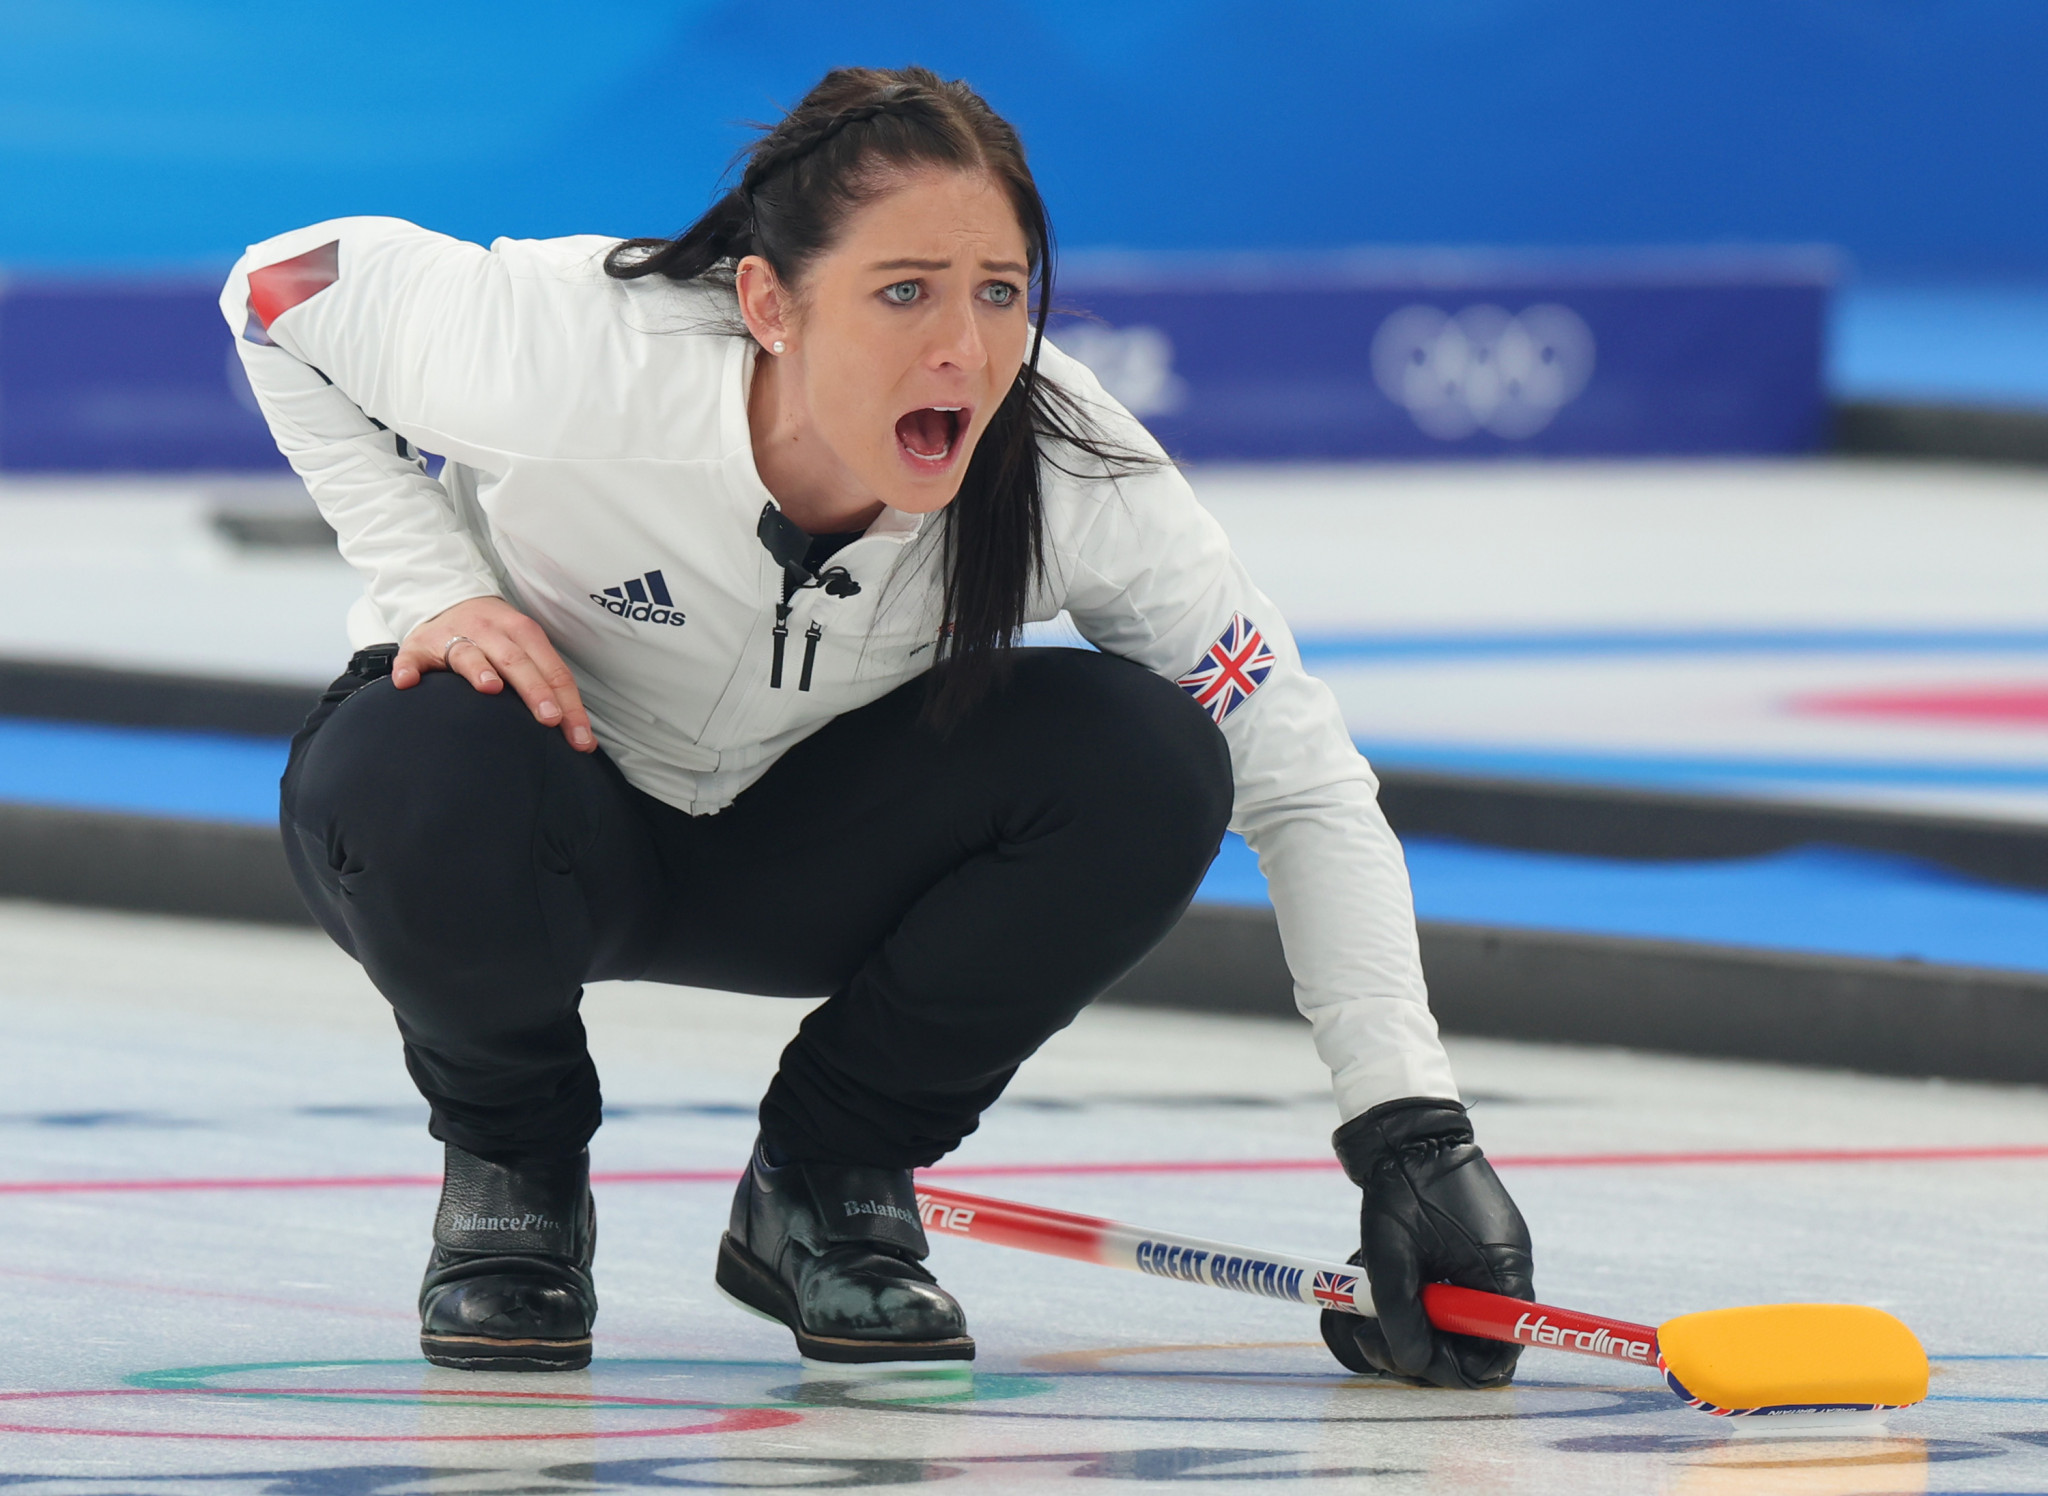 Olympic gold medal-winning curling skip Eve Muirhead is set to serve as an athlete ambassador for Britain at Friuli Venezia Giulia 2023 ©Getty Images